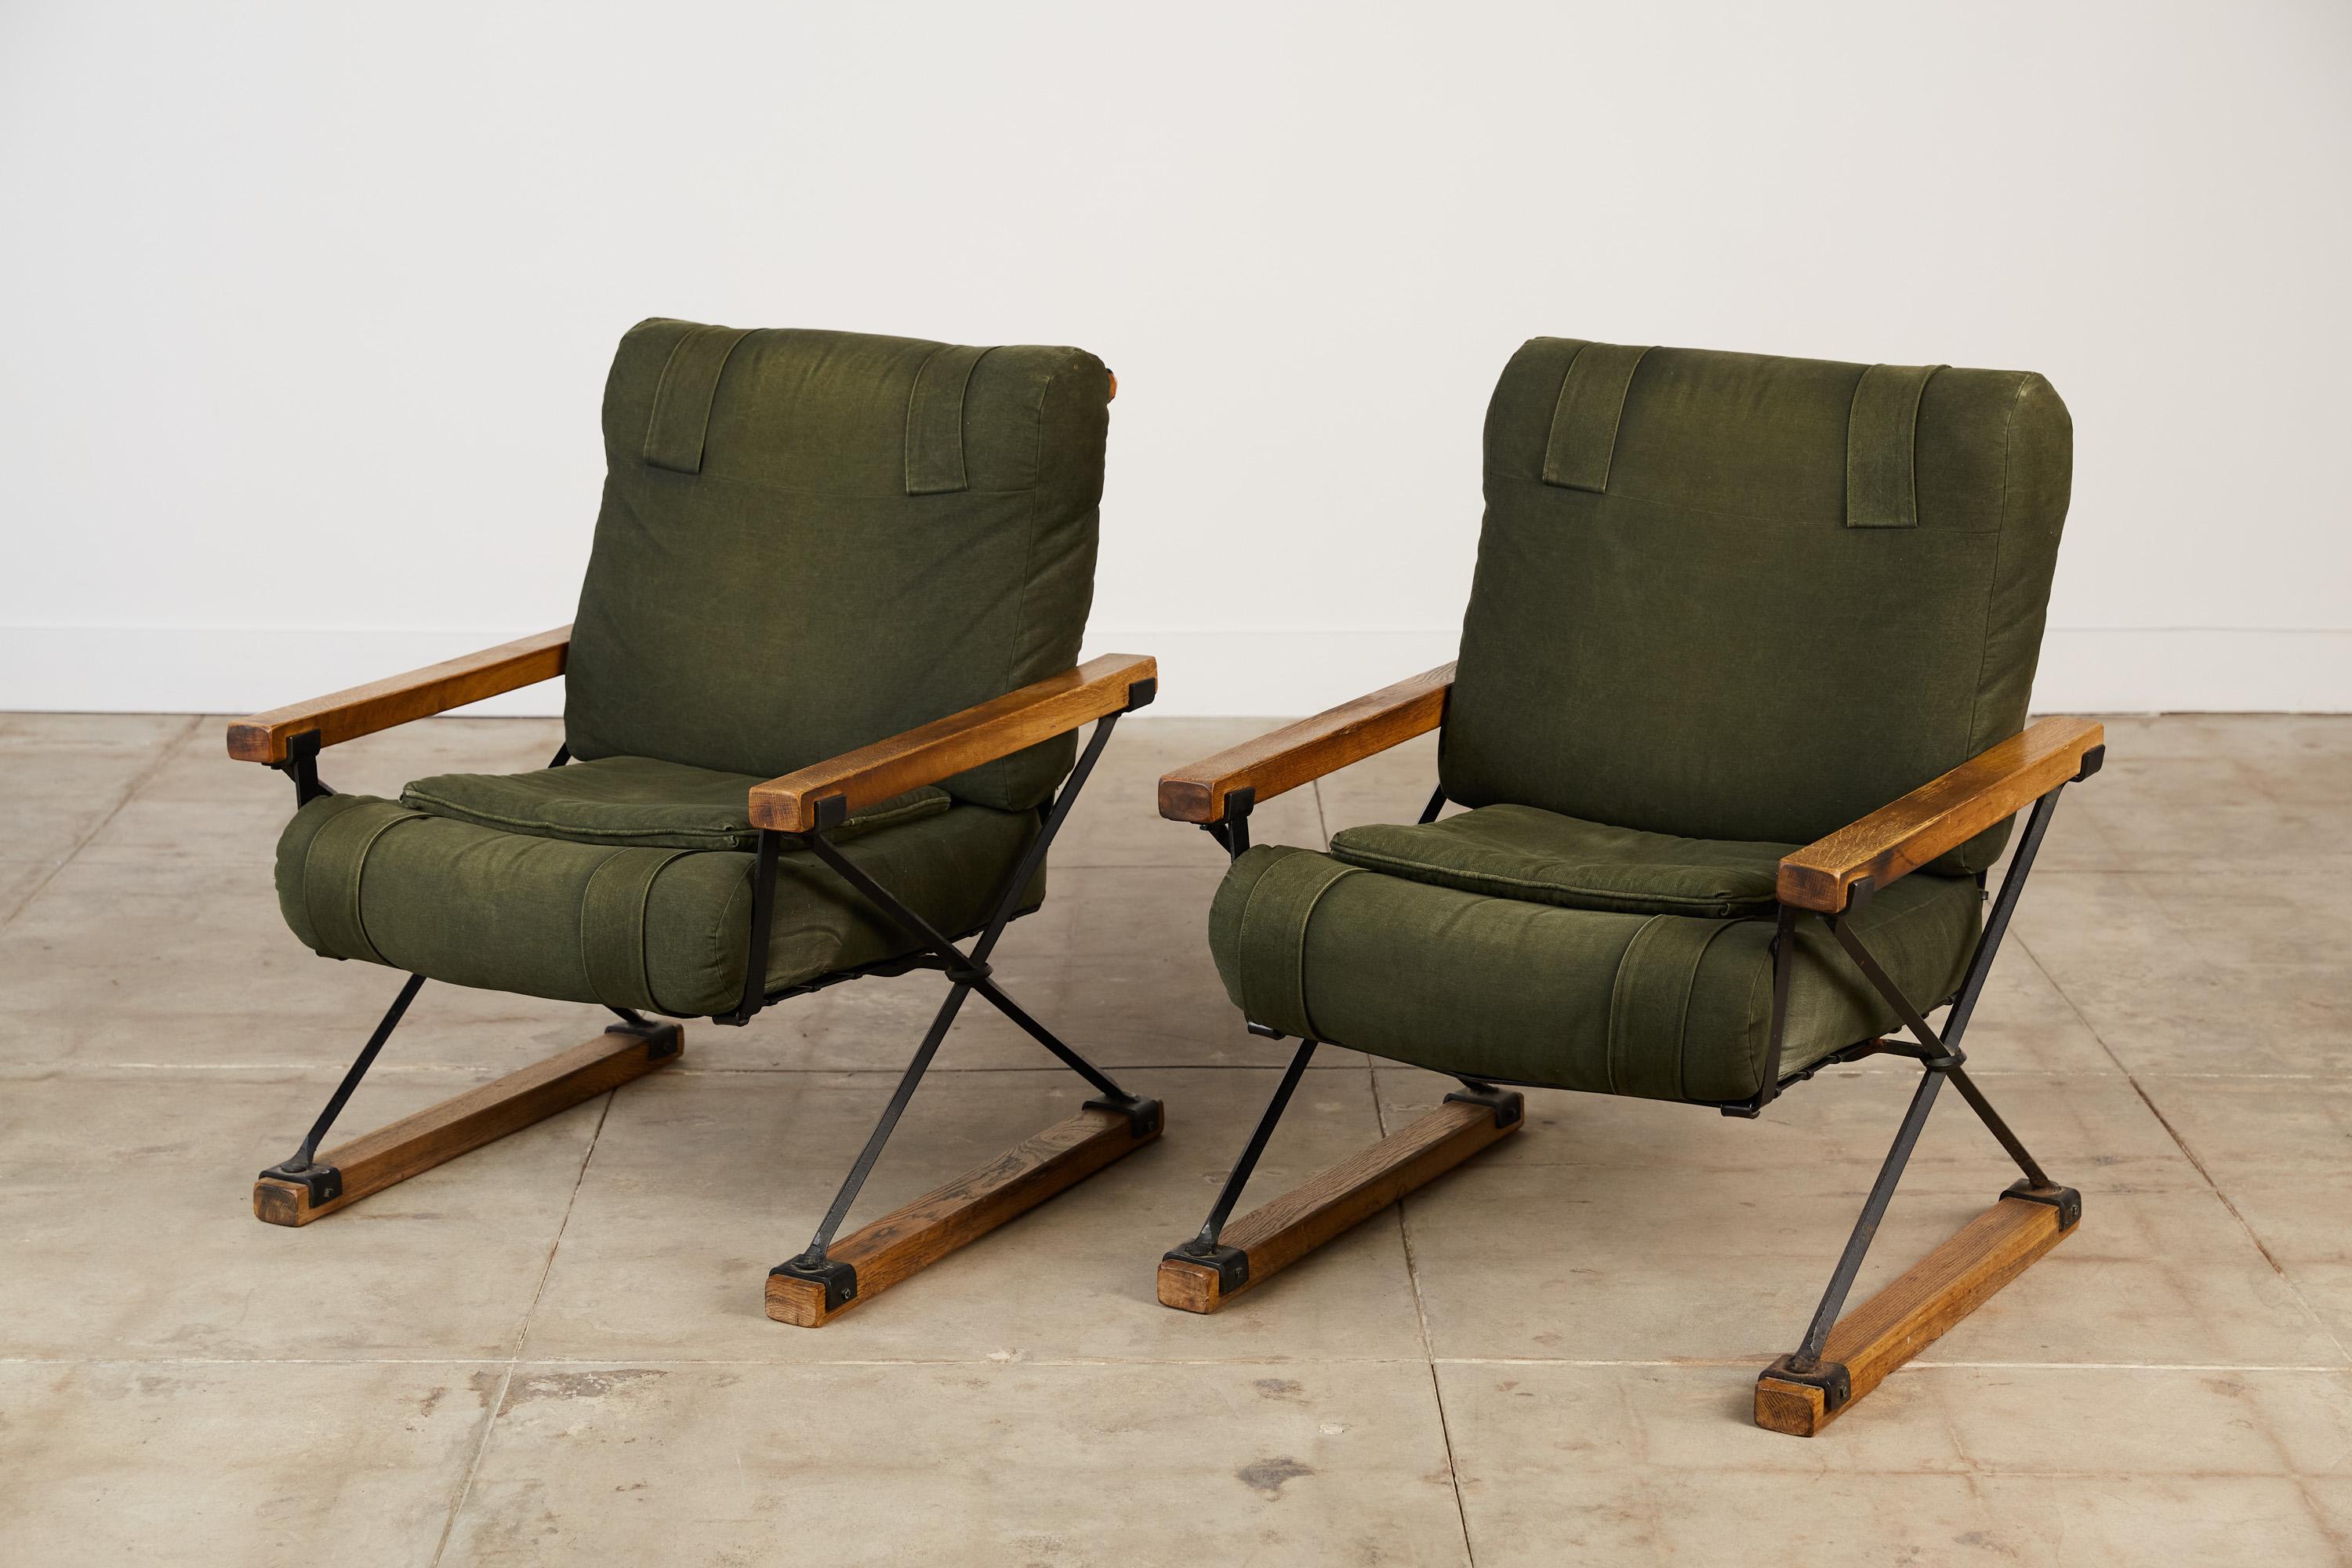 A pair of Cleo Baldon lounge chairs for Terra, USA, c.1960s. The chairs feature a wrought iron base with x-frame profiles. They're grounded by rectangular blocks as the legs with the same design element mirrored in the armrests. The pair still